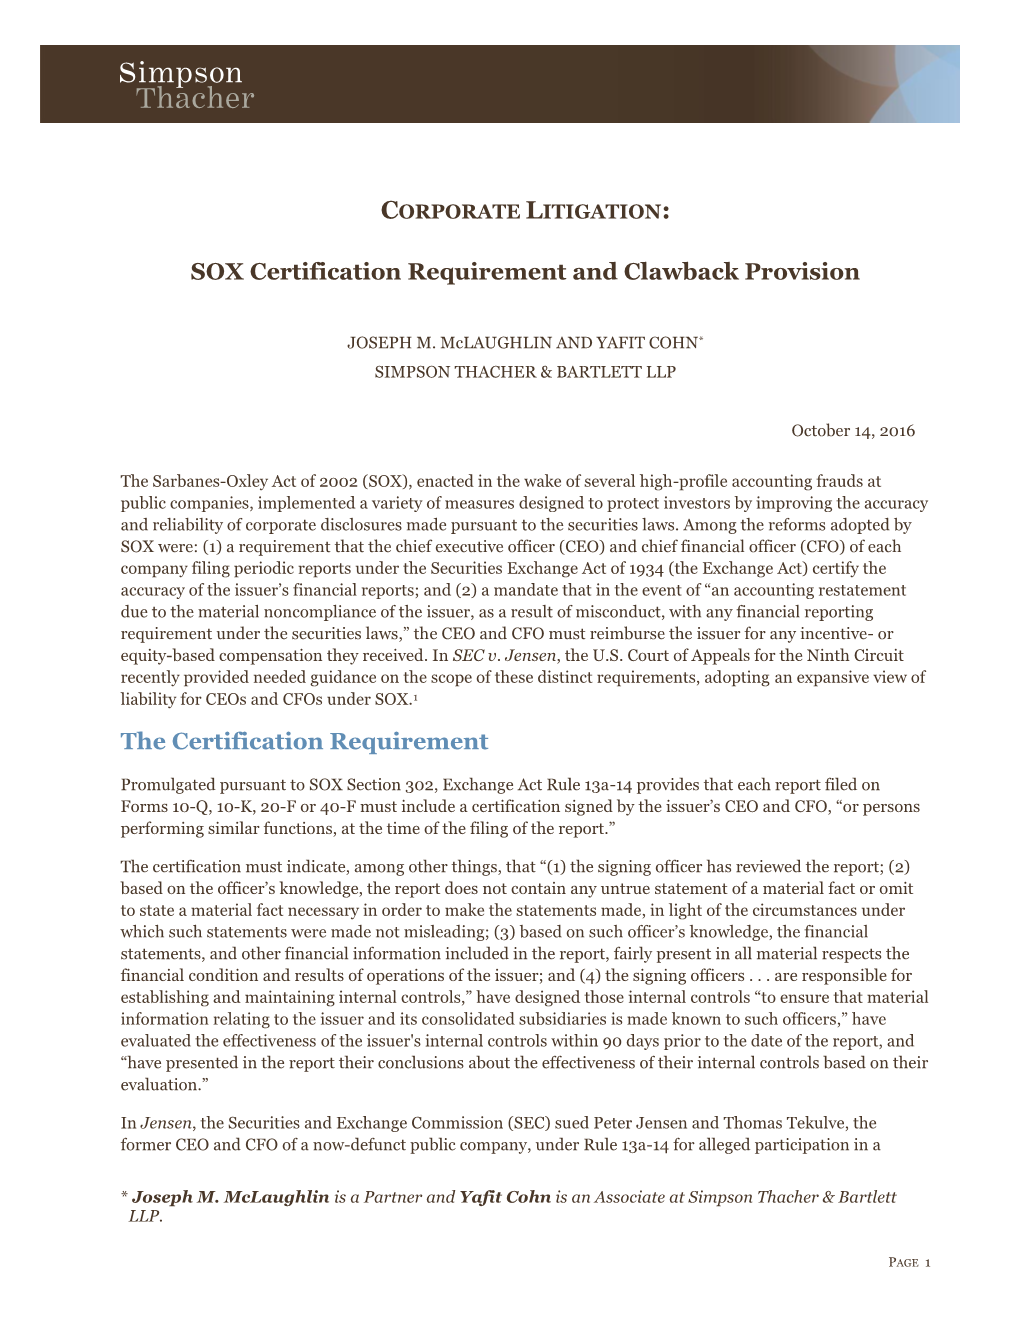 Corporate Litigation: SOX Certification Requirement and Clawback